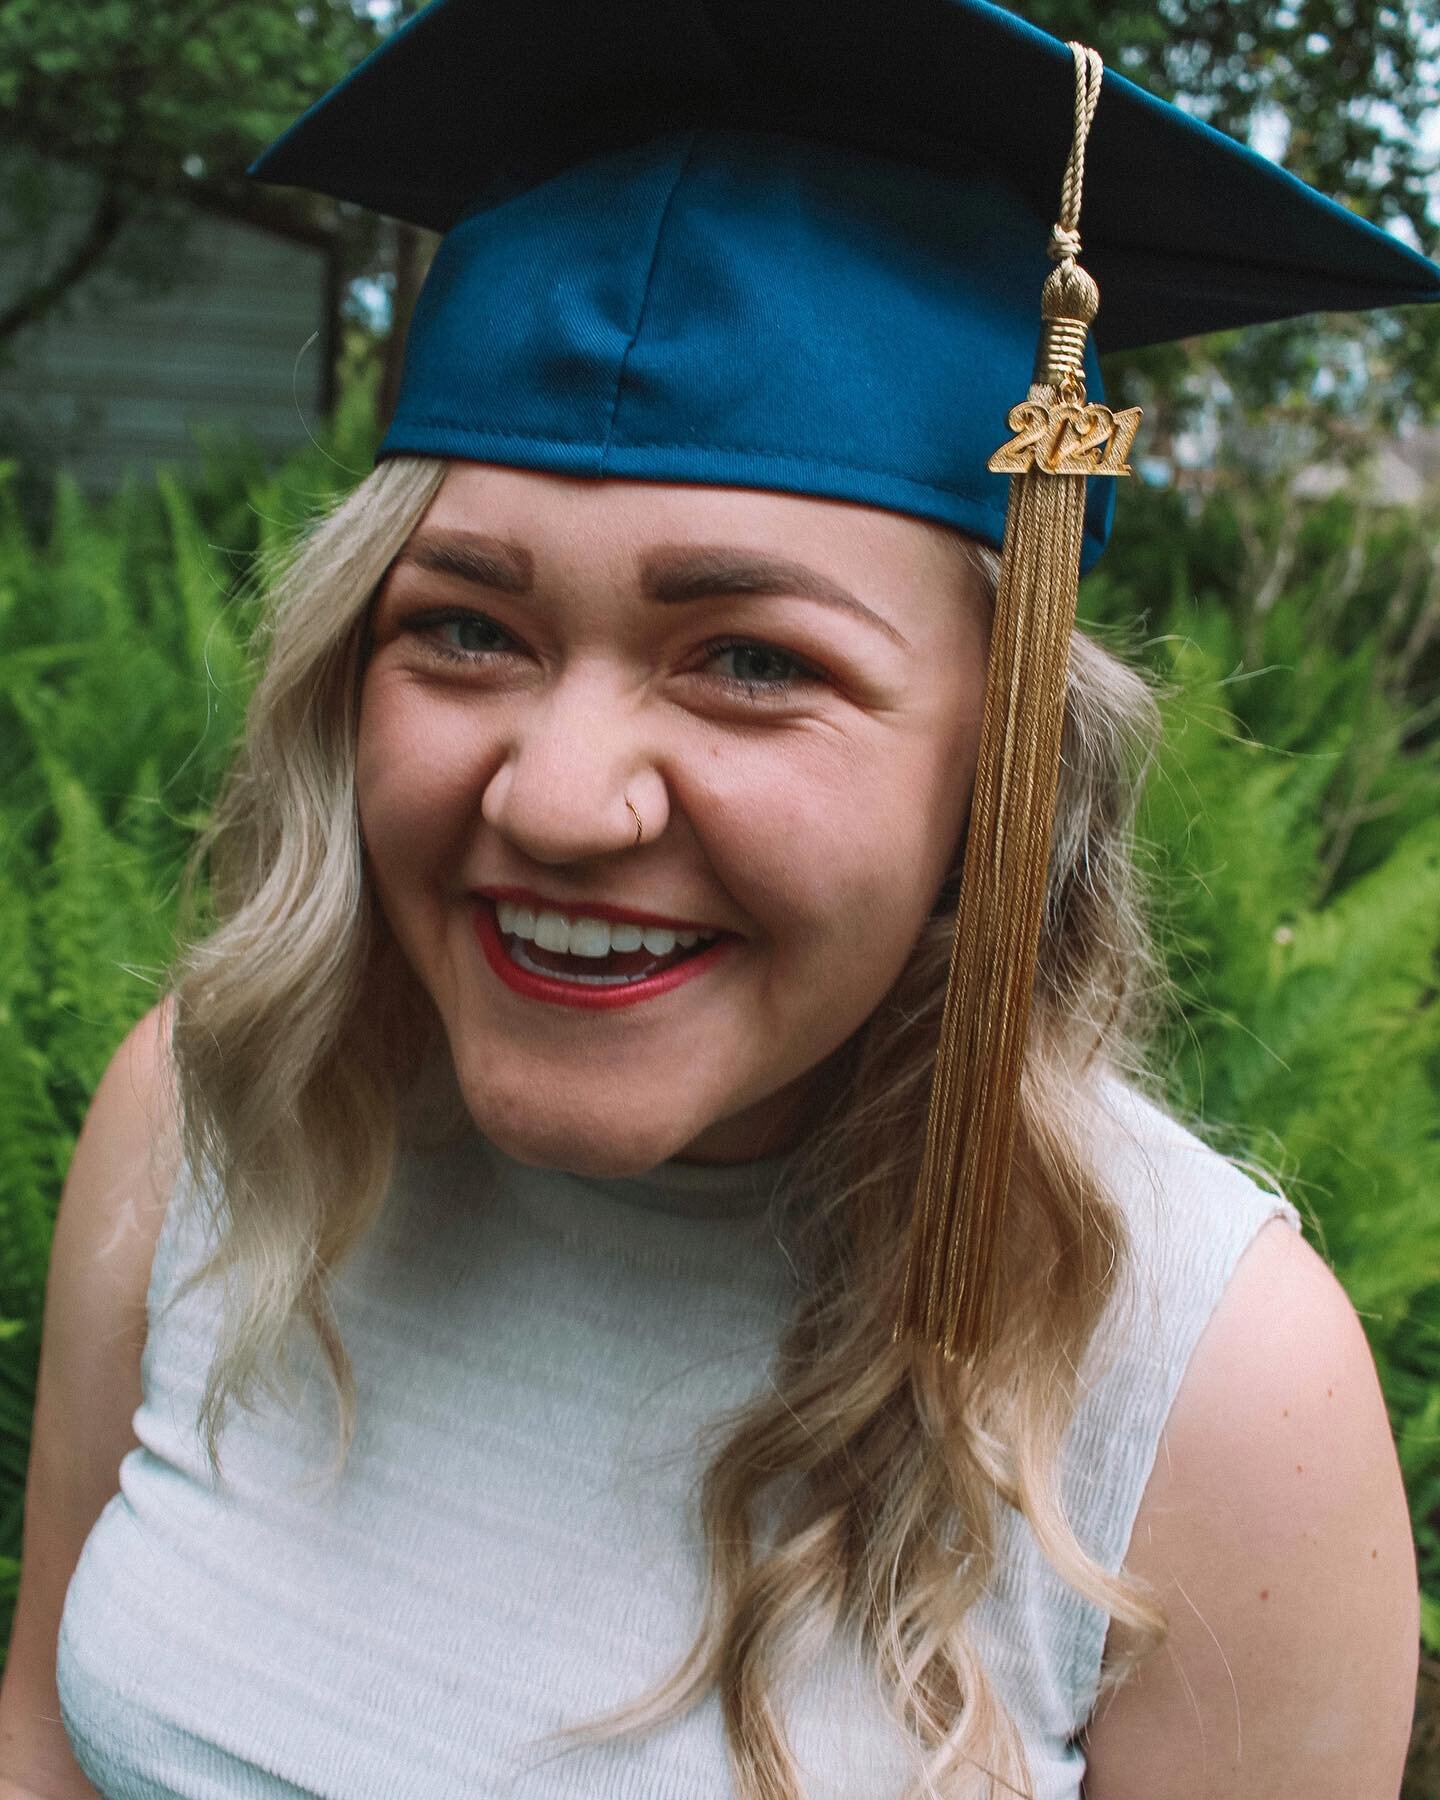 Frances Leigh Homan, MTA
🎓
Never did I ever think I&rsquo;d be graduating from my couch with a Master of Tourism Administration in the midst of a global pandemic. But here we are. The last year and a half has thrown a lot of curveballs our way, but 